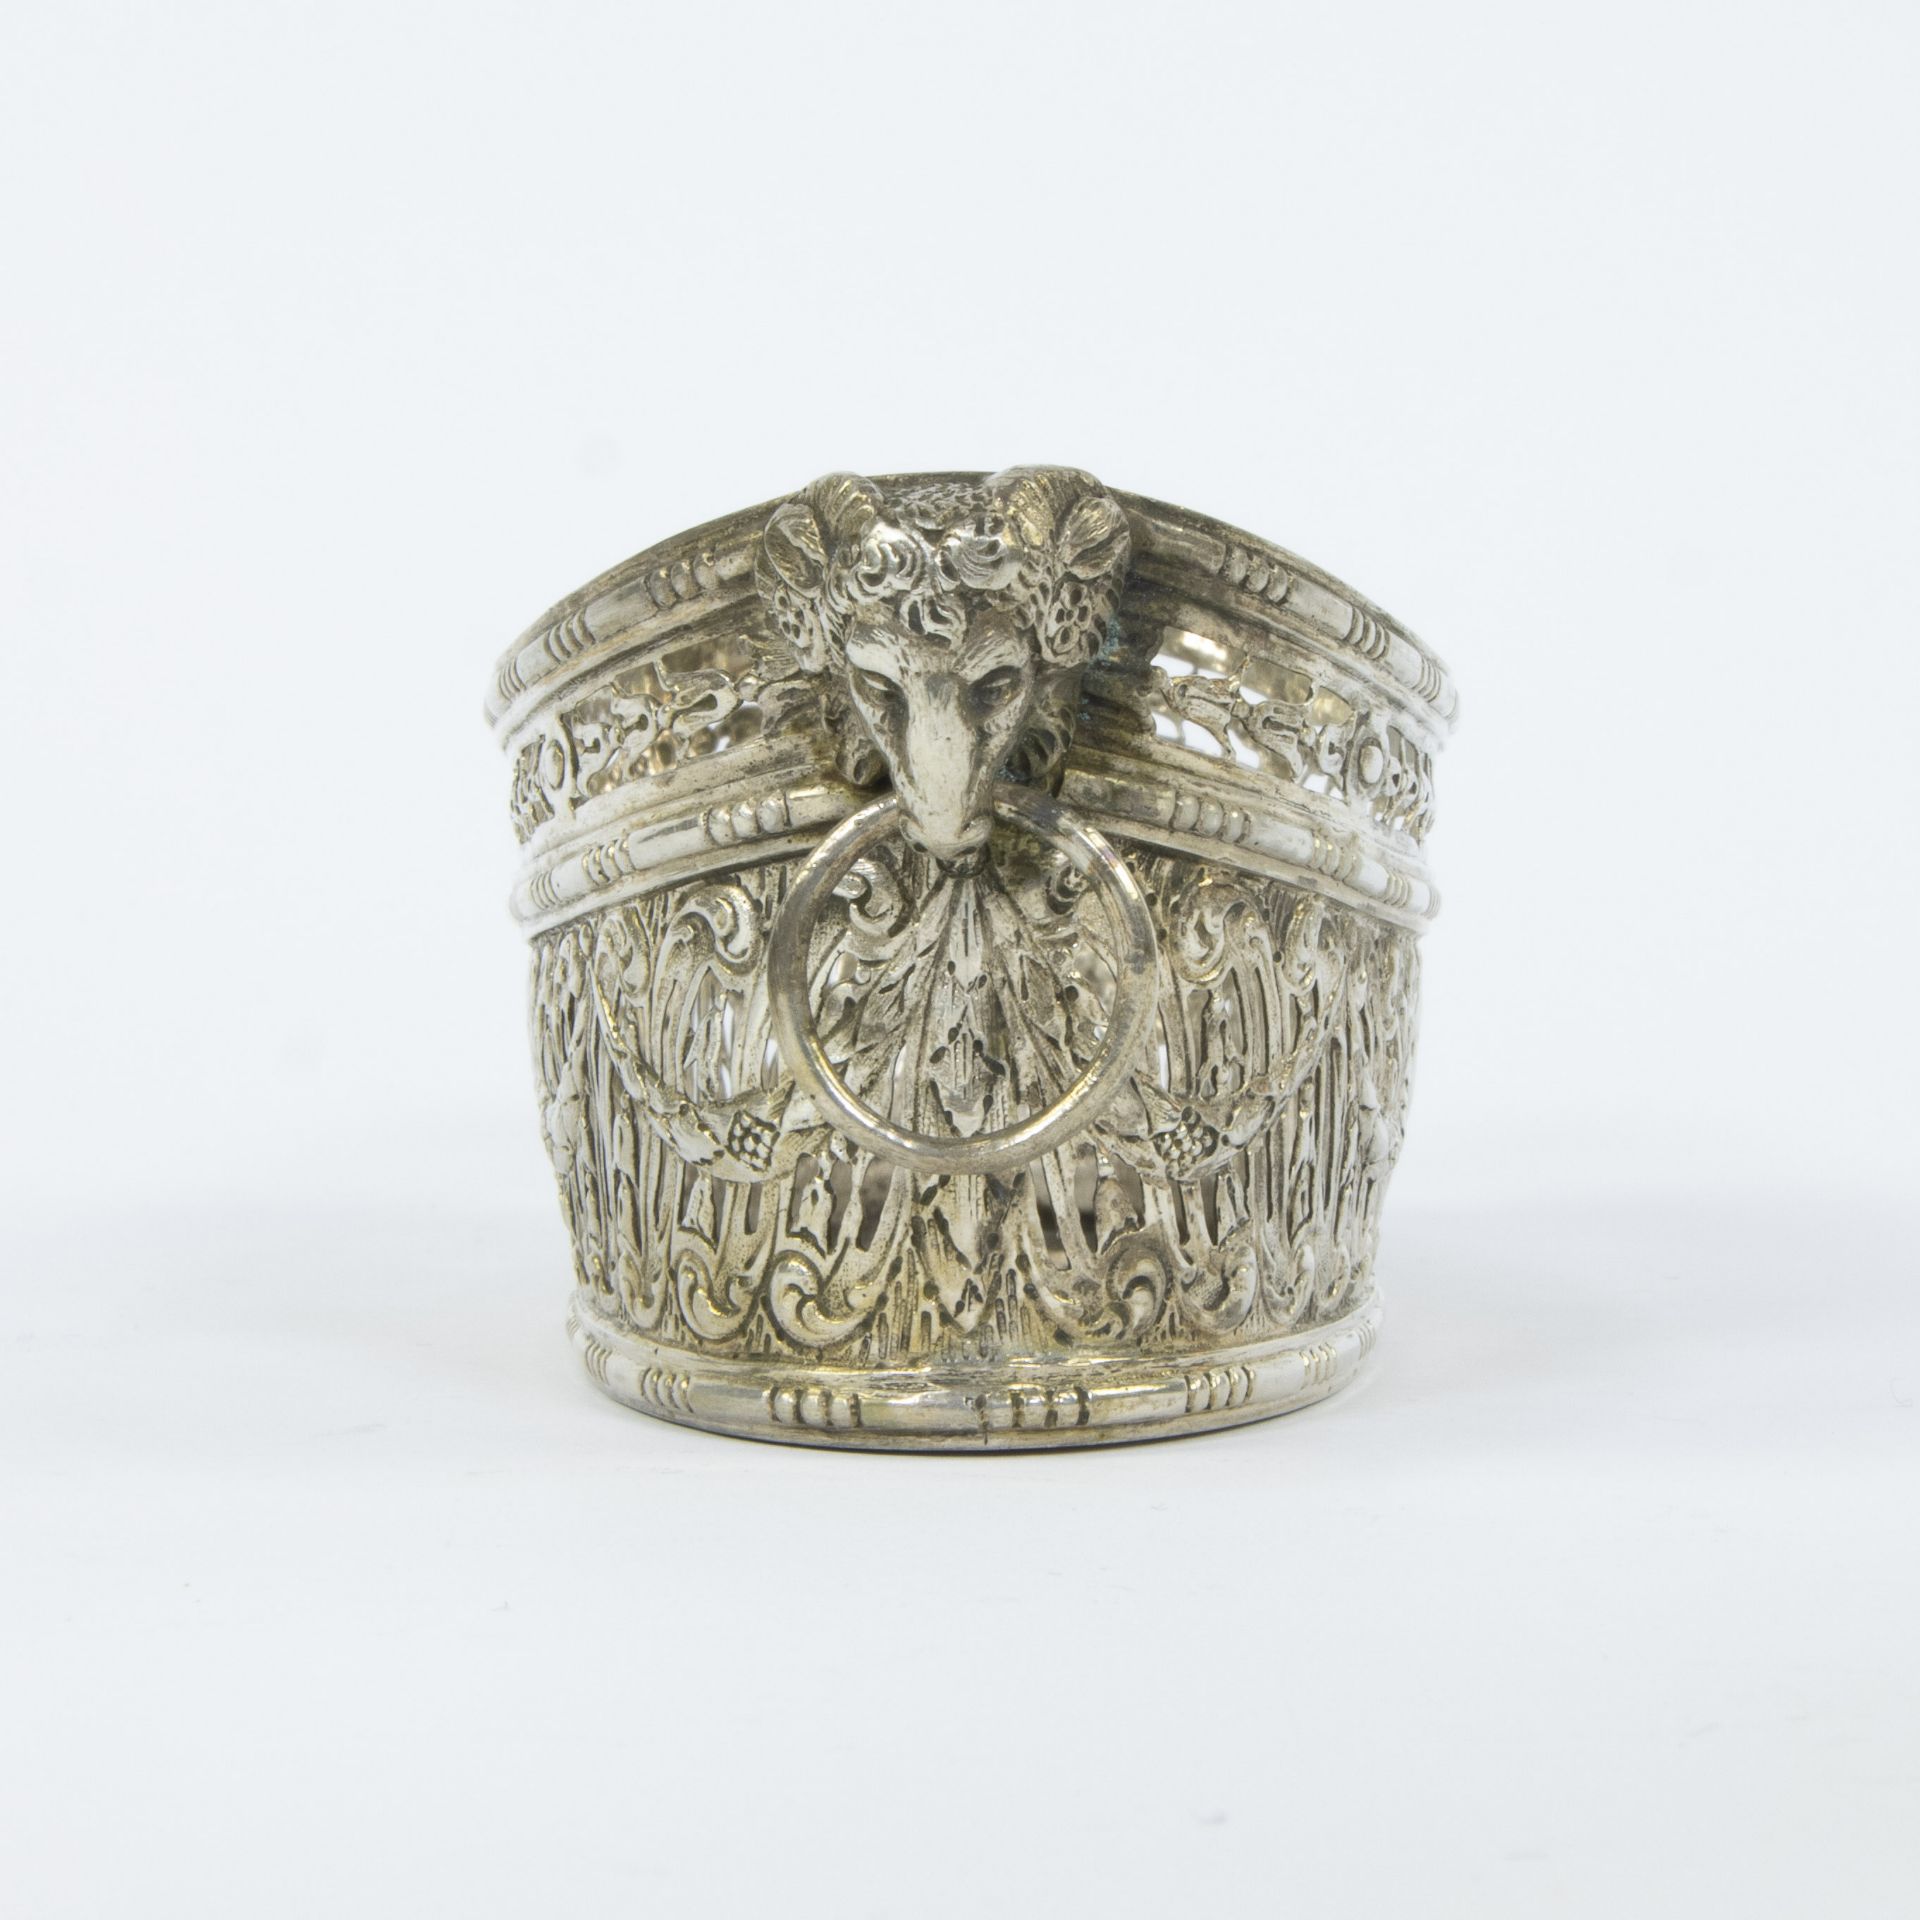 A French oval silver basket in Louis XVI style decorated with garlands, medallion and ram's heads - Image 2 of 6